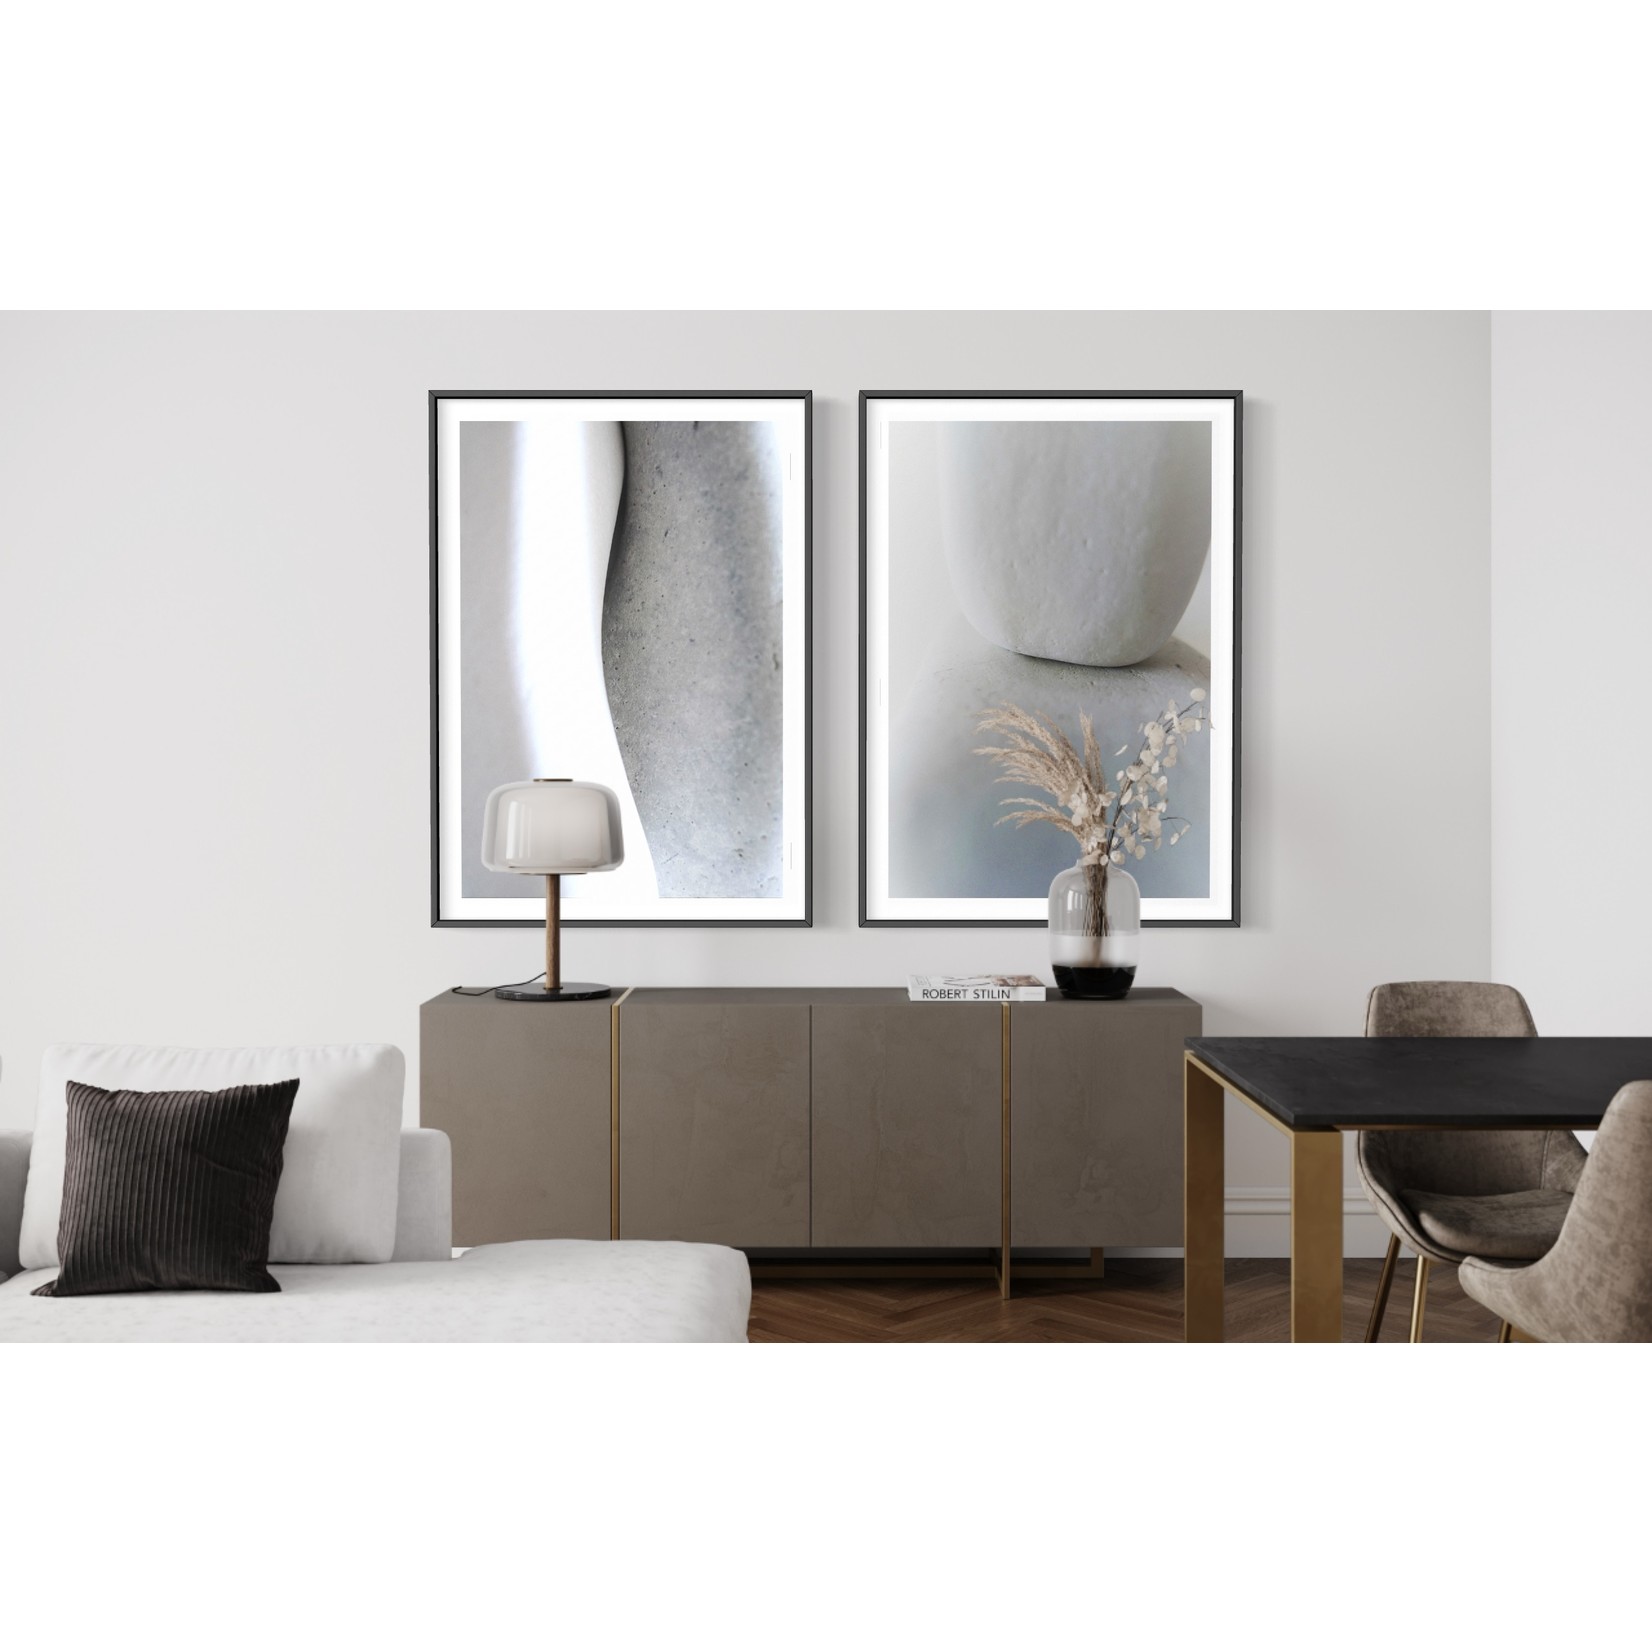 Fine Art Print on Rag Paper Set In Stone 5 by Eric Gizard